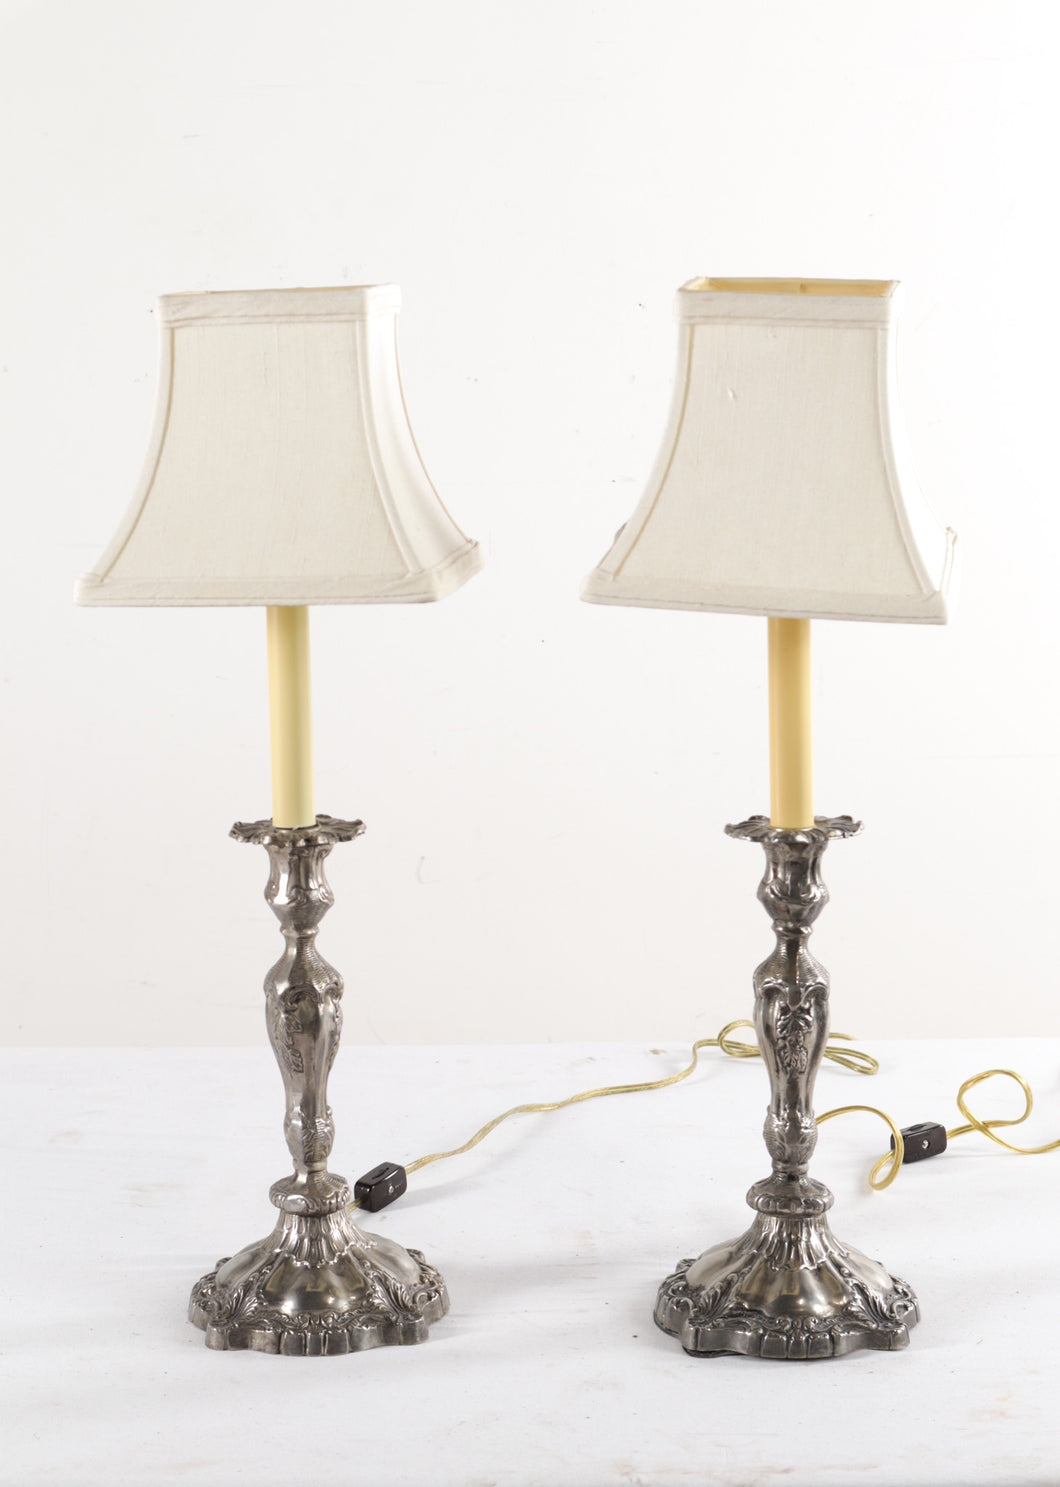 Pair of Sterling Silver Candlestick Lamps